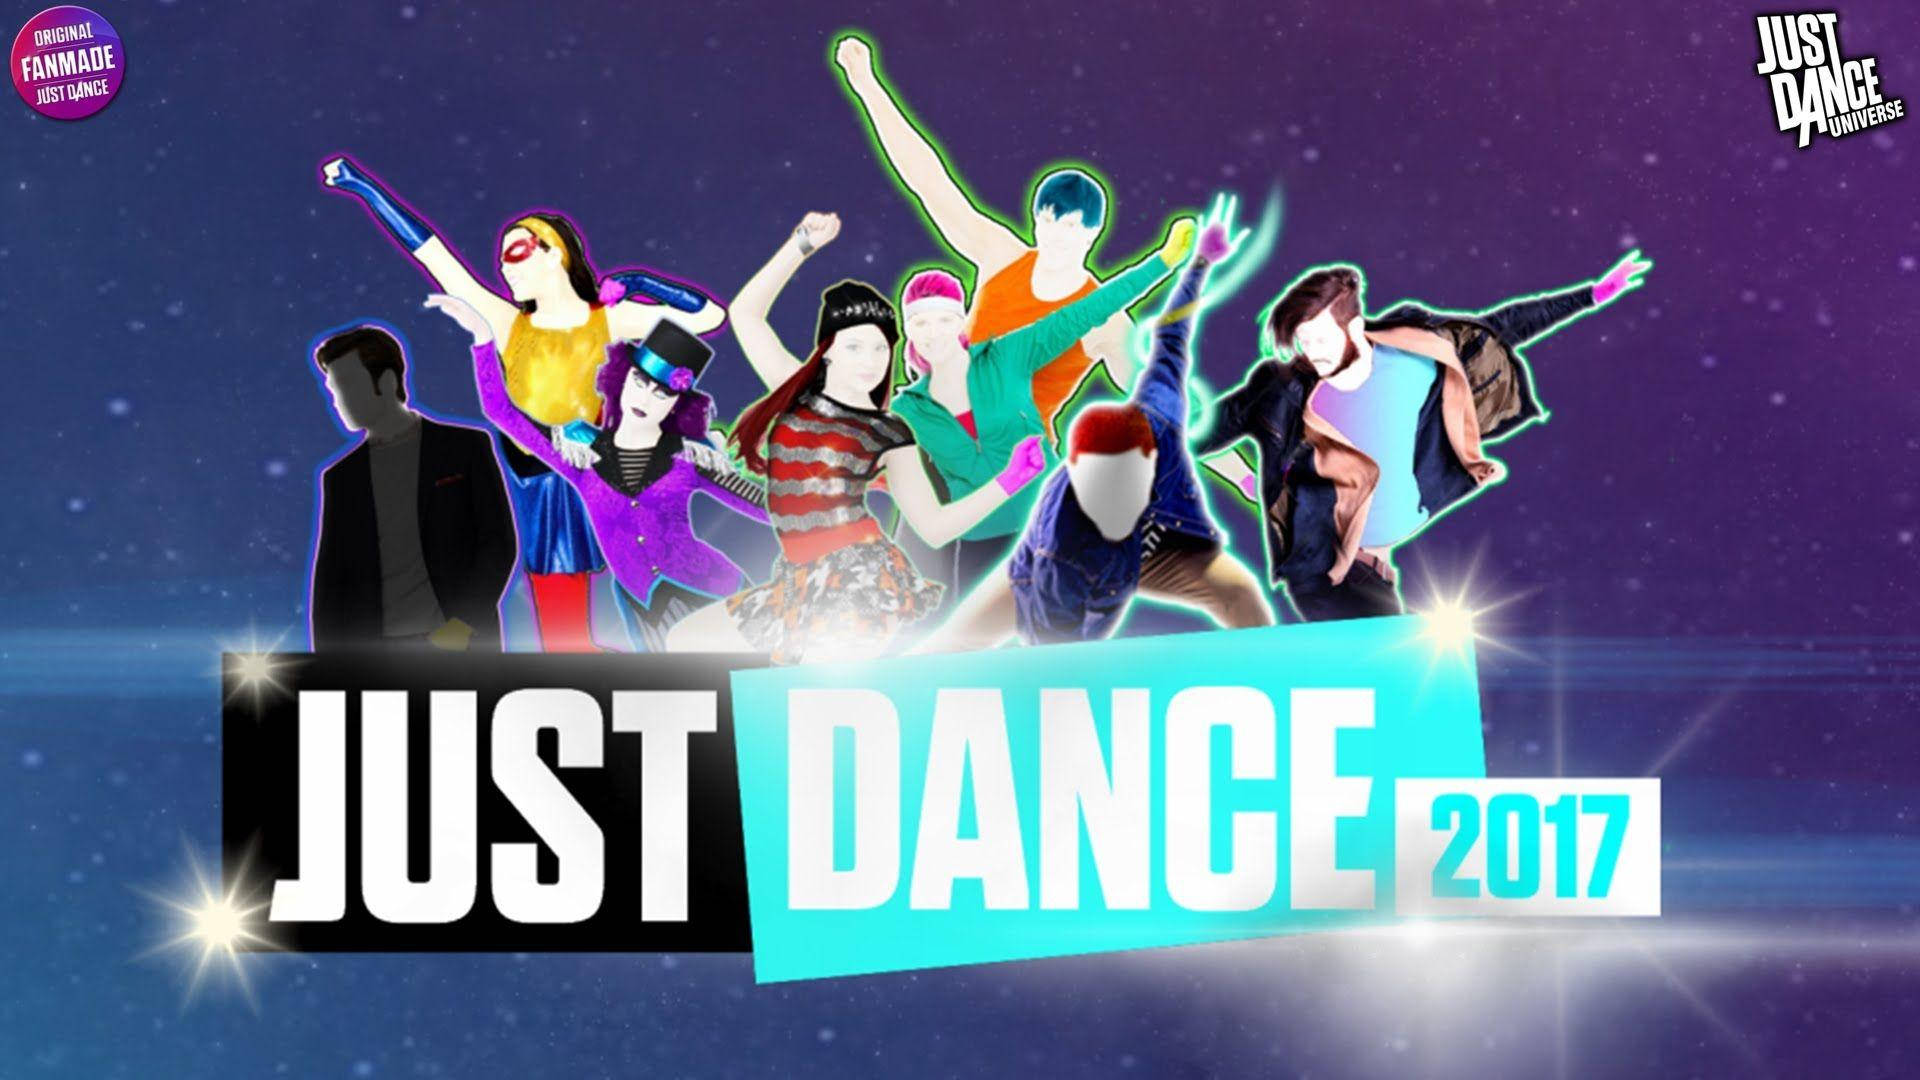 Just Dance 2017 Poster Background